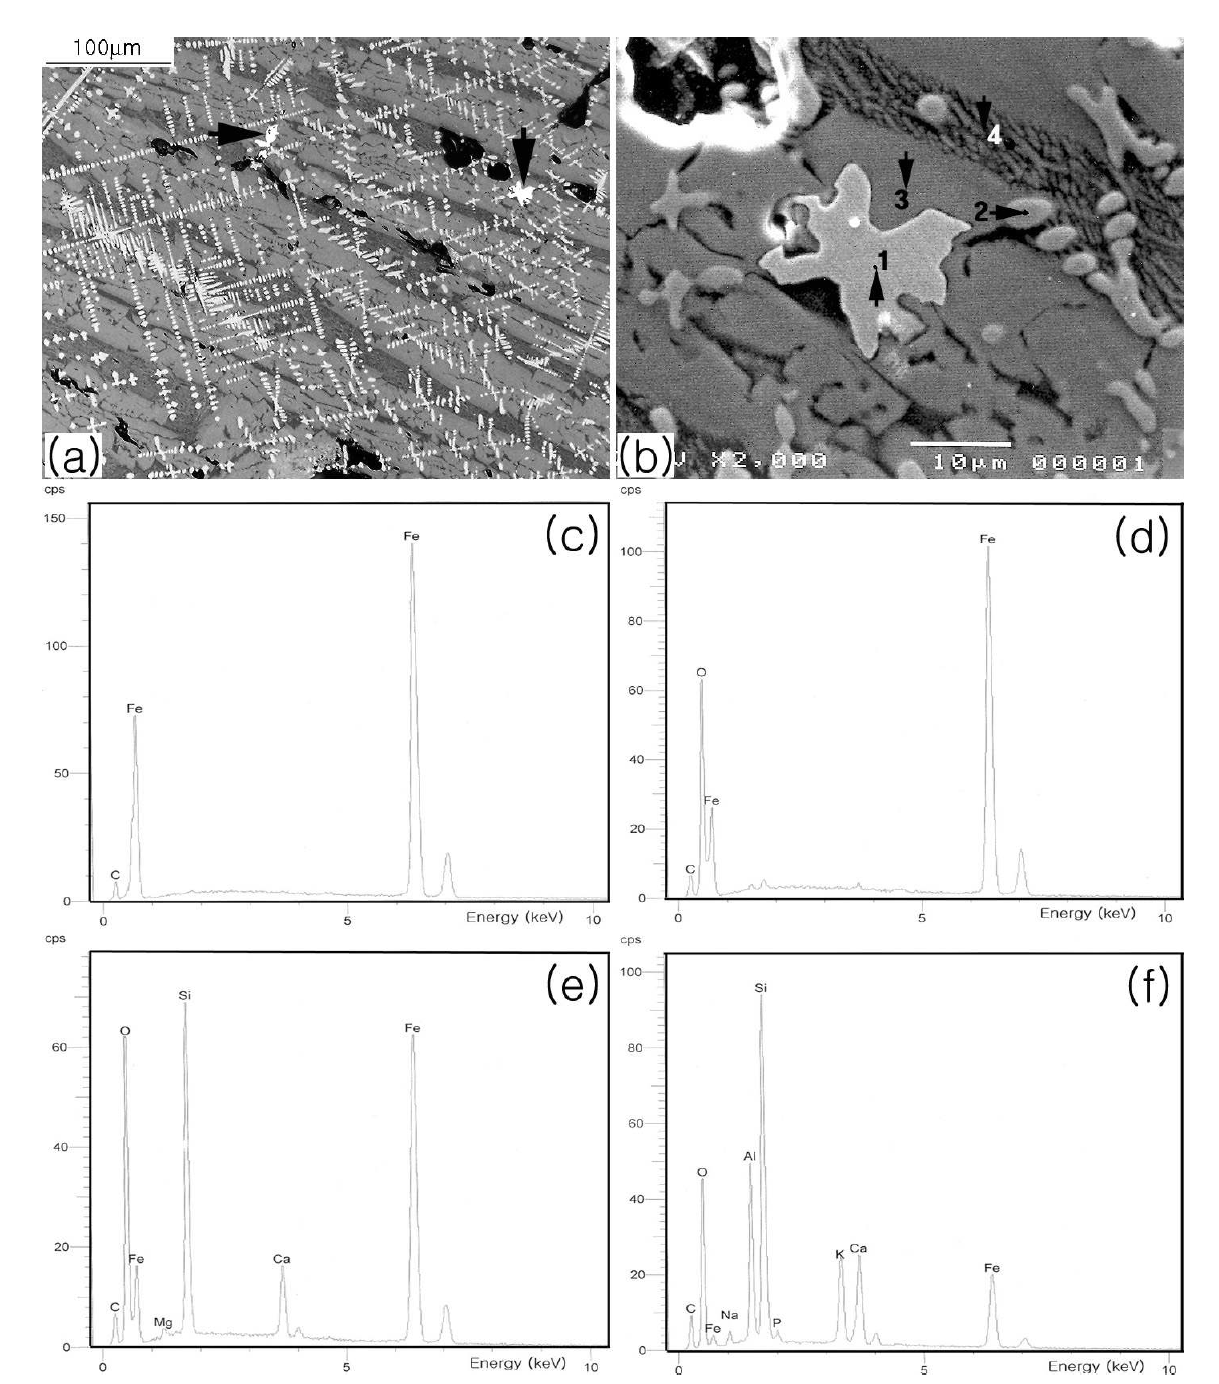 Microstructures and EDS spectra from the most typical slag objects examined. (a) Optical micrograph at 200x magnification (b) SEI micrograph at 2,000x magnification, magnifying the upper right corner of Fig. 4a; (c), (d), (e) and (f) EDS spectra from arrow 1, 2, 3 and 4 in Fig. 4b, respectively.